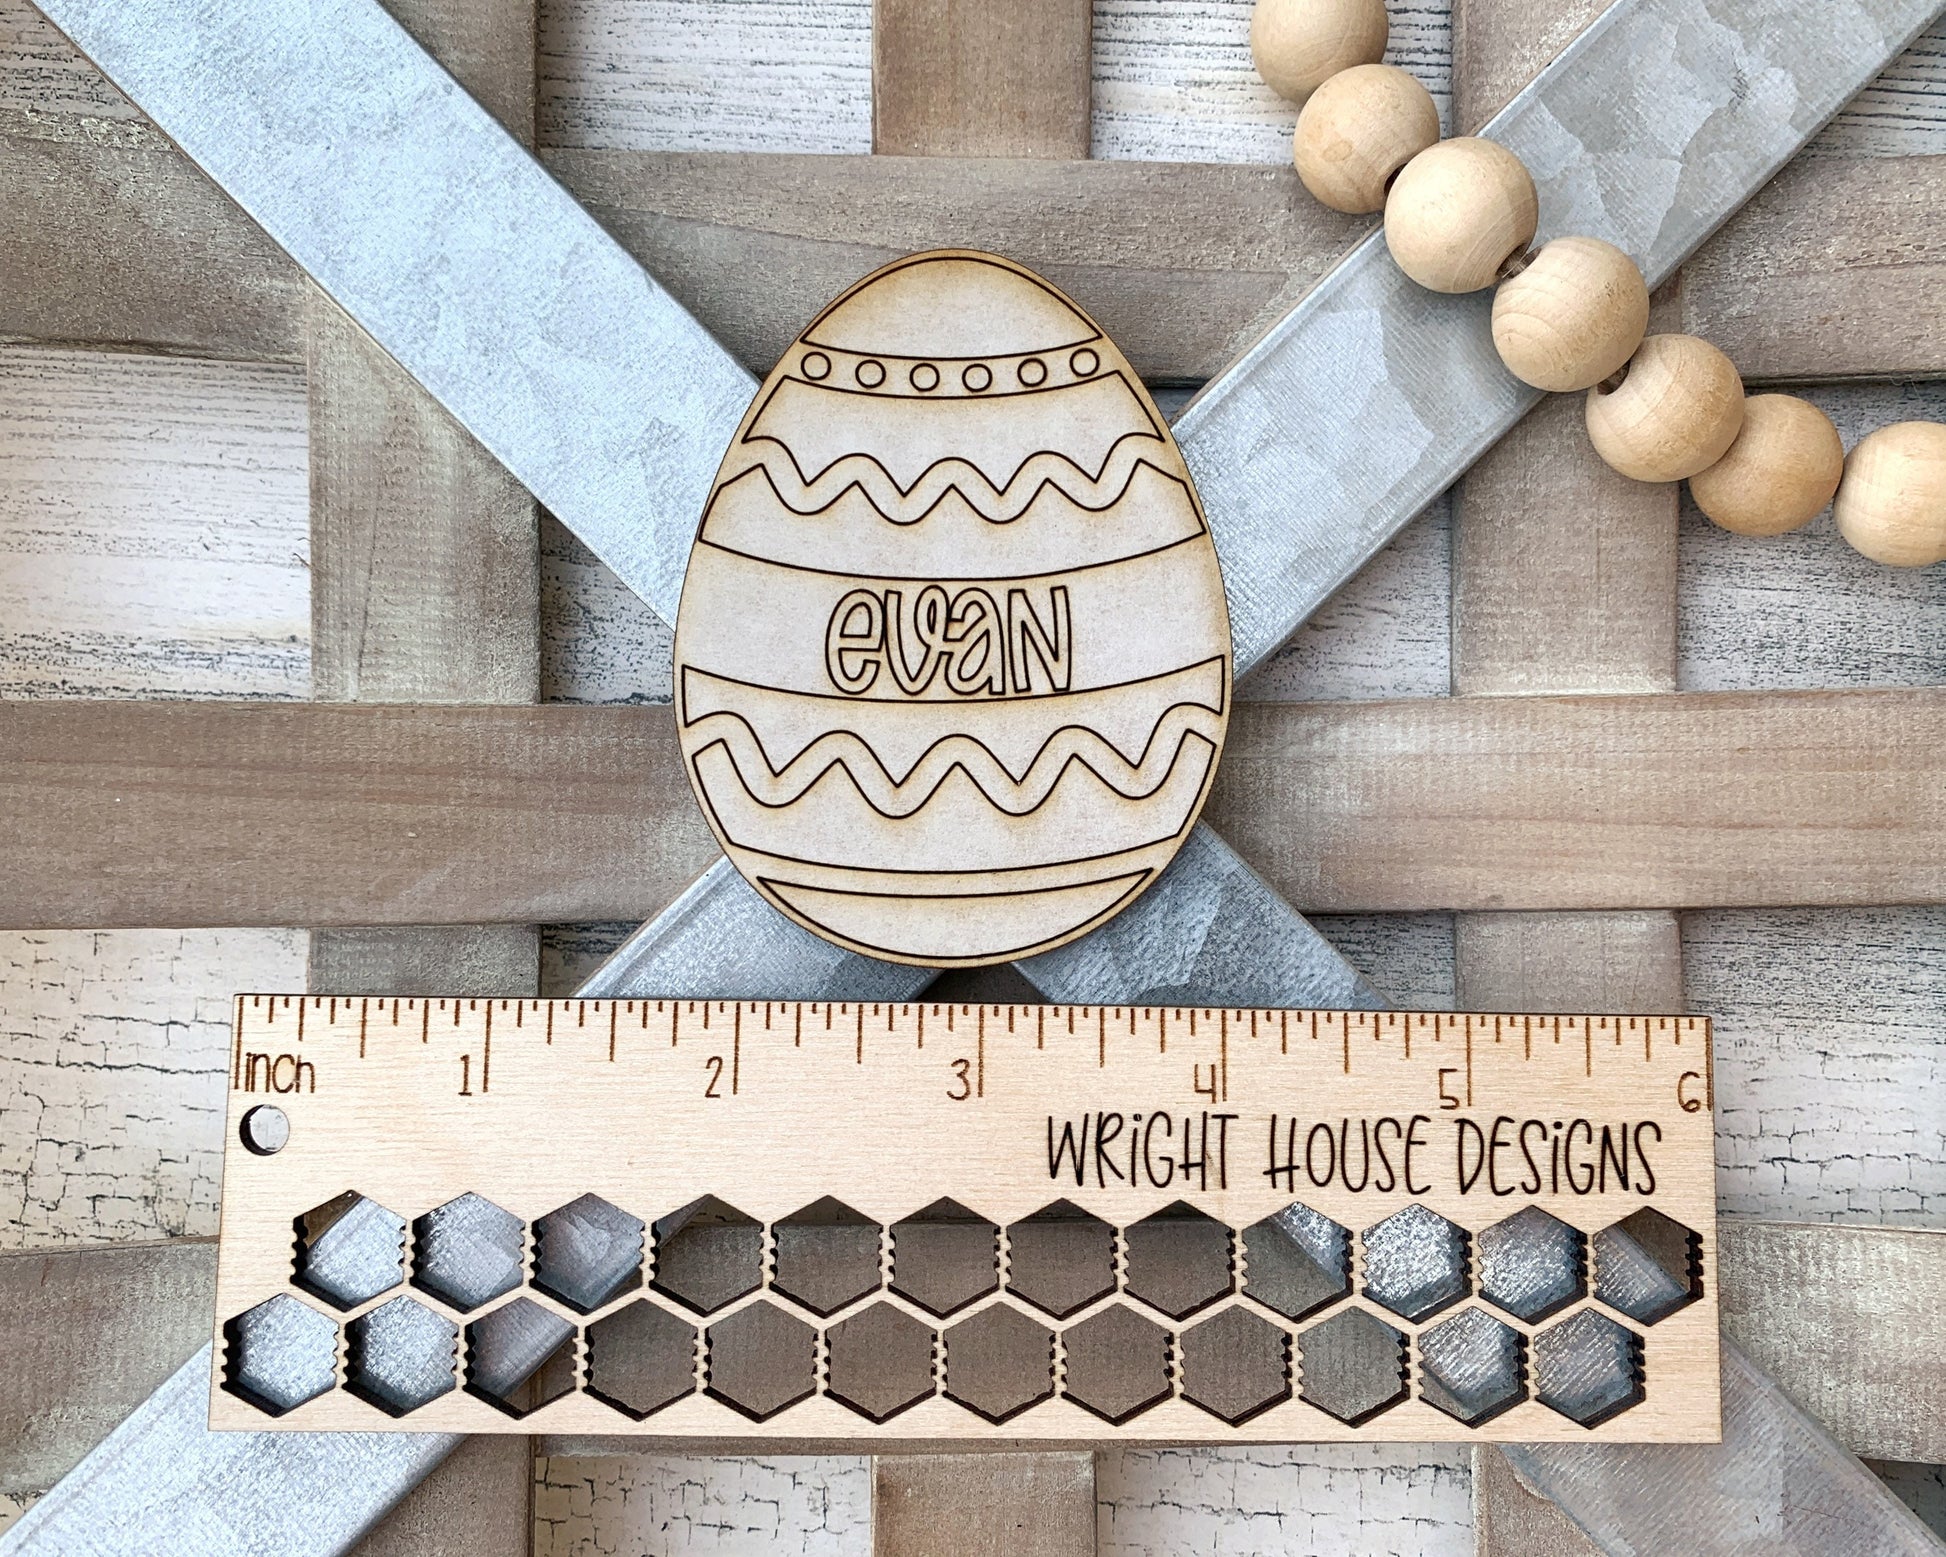 Kid's Personalized Easter Eggs - DIY Mess Free Wooden Peel and Paint Craft - Easter Basket Fillers - Easter Bunny Gifts - Spring Bag Tags